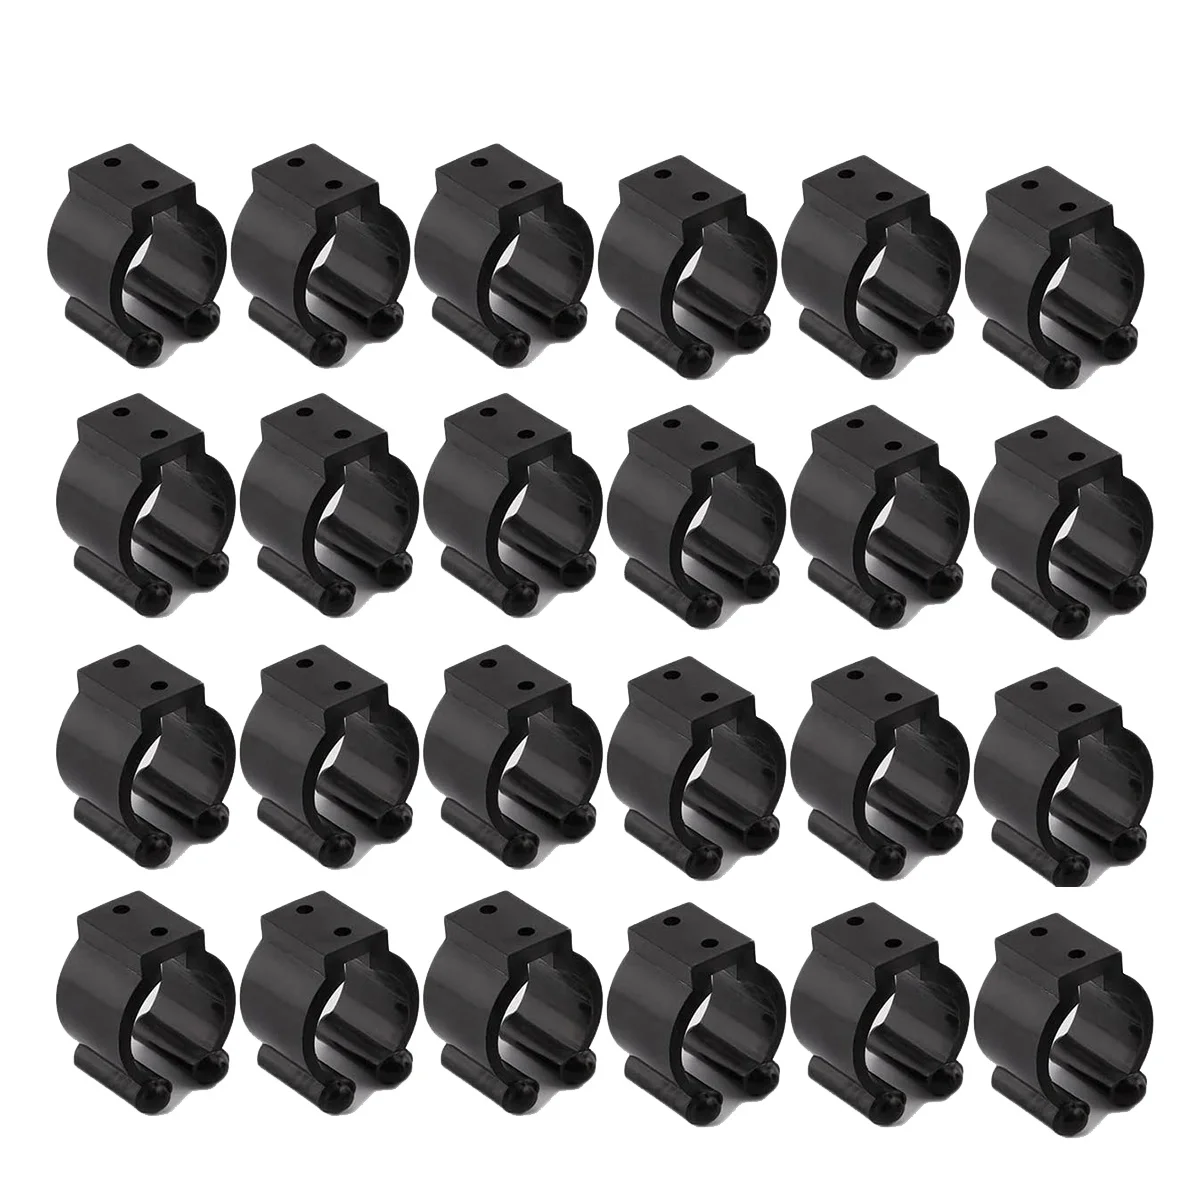 

24 Pack Wall Mounted Fishing Rod Storage Clips Clamps Holder Billiard Cue Organizer, Fishing Pole Holder Storage Rack